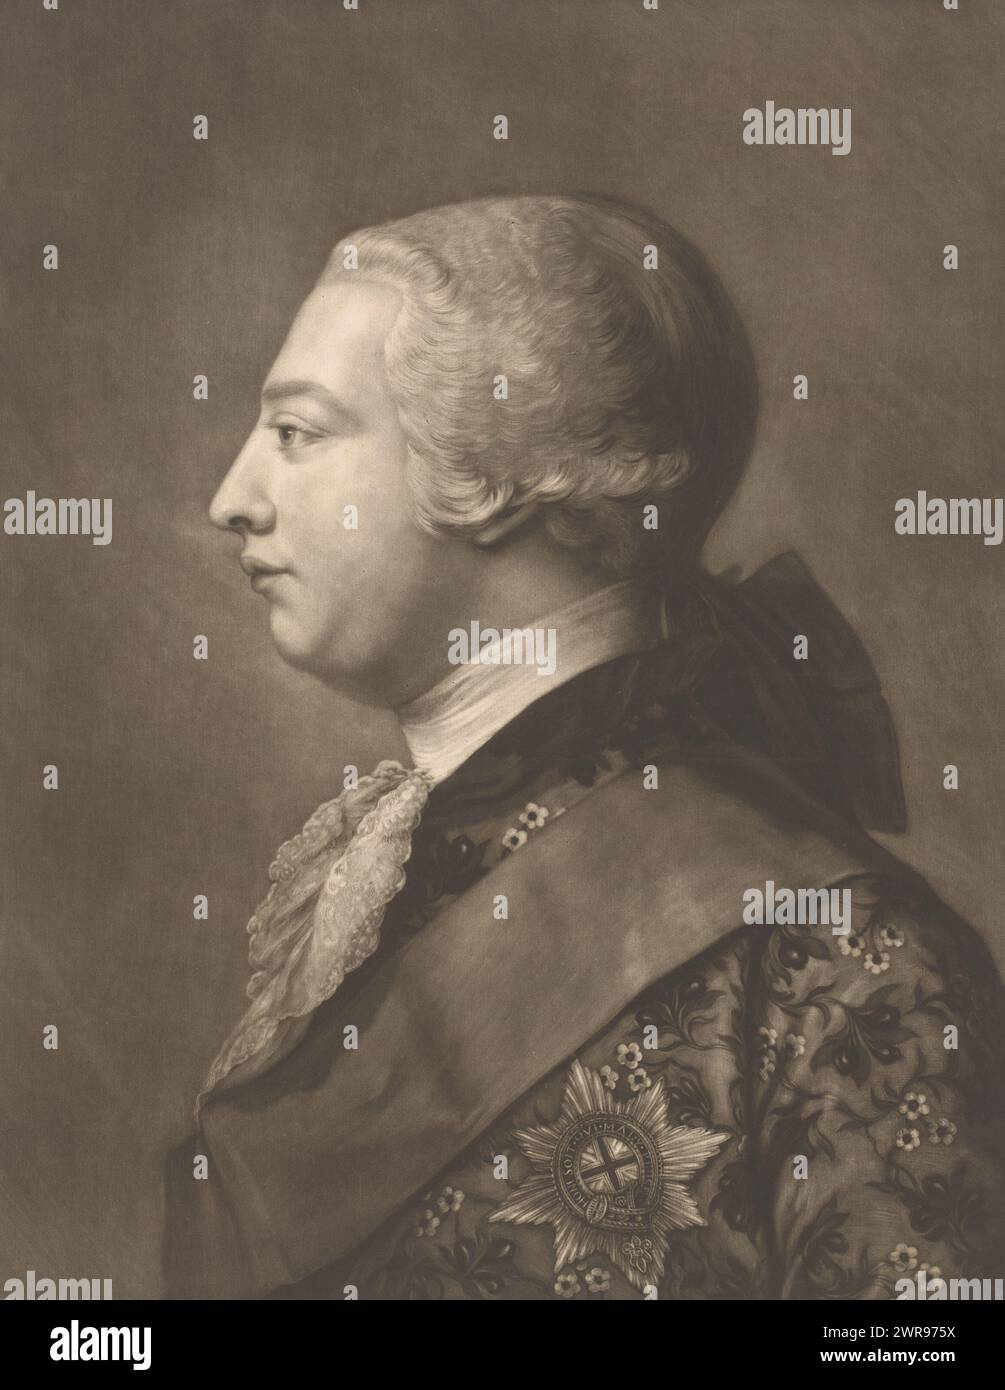 Portrait of George III of the United Kingdom, print maker: James McArdell, after painting by: Jeremias Meyer, London, 1761, paper, height 506 mm × width 355 mm, print Stock Photo